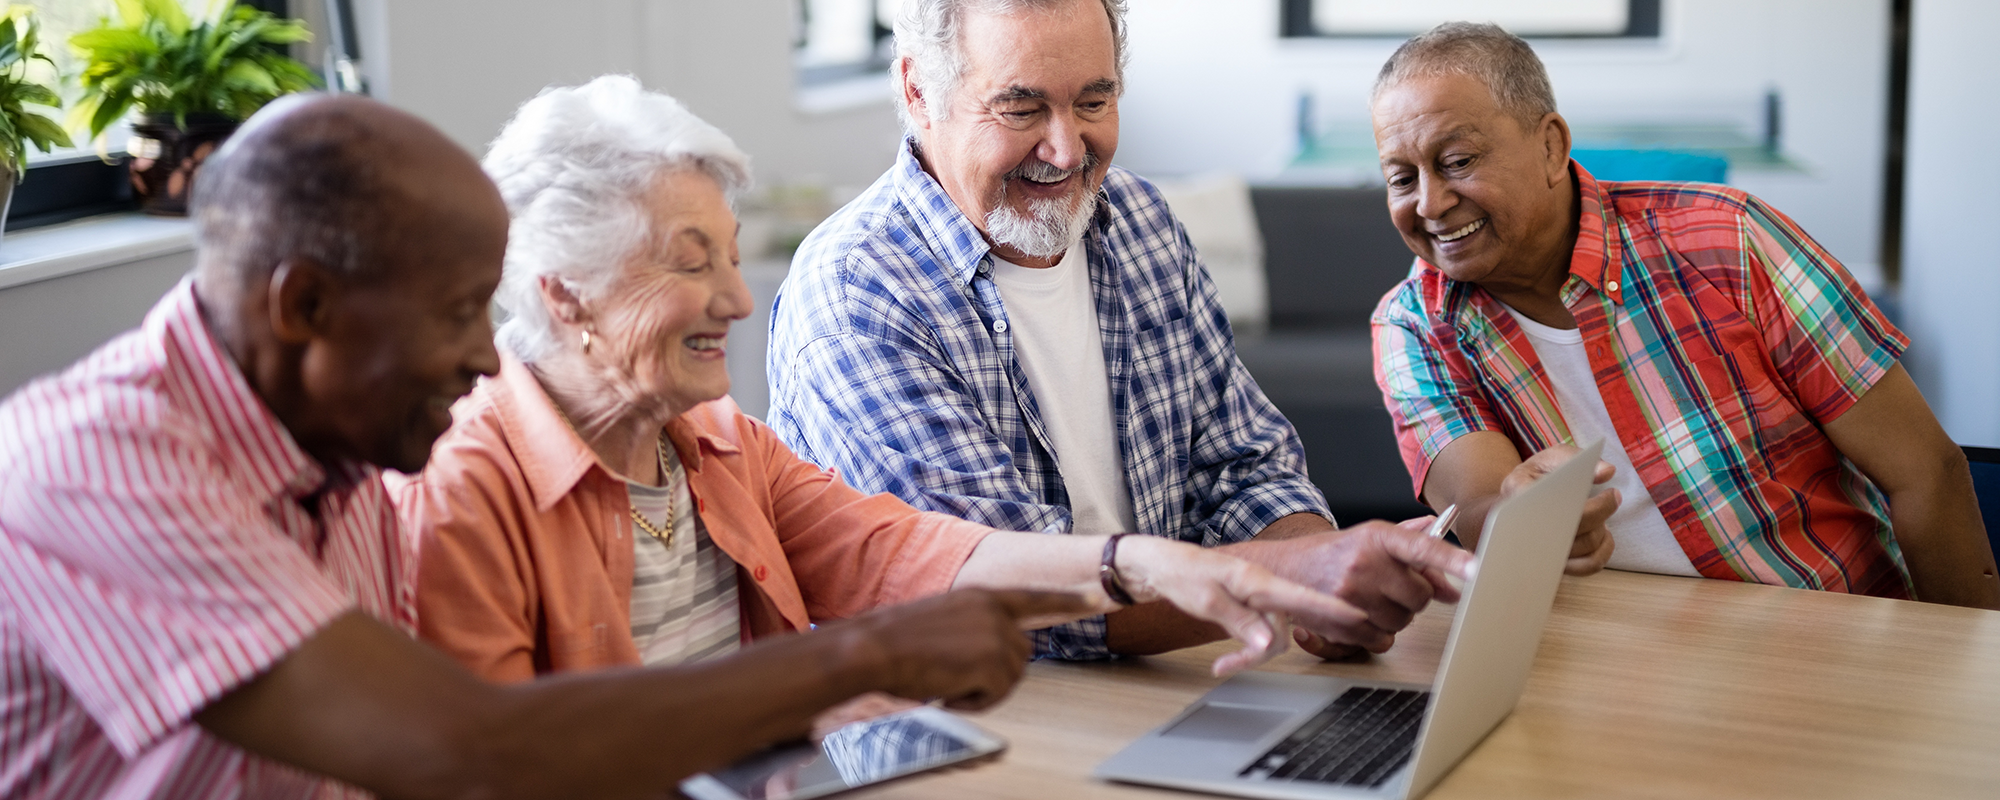 four older people sitting at a table looking at a shared laptop. They're all smiling.